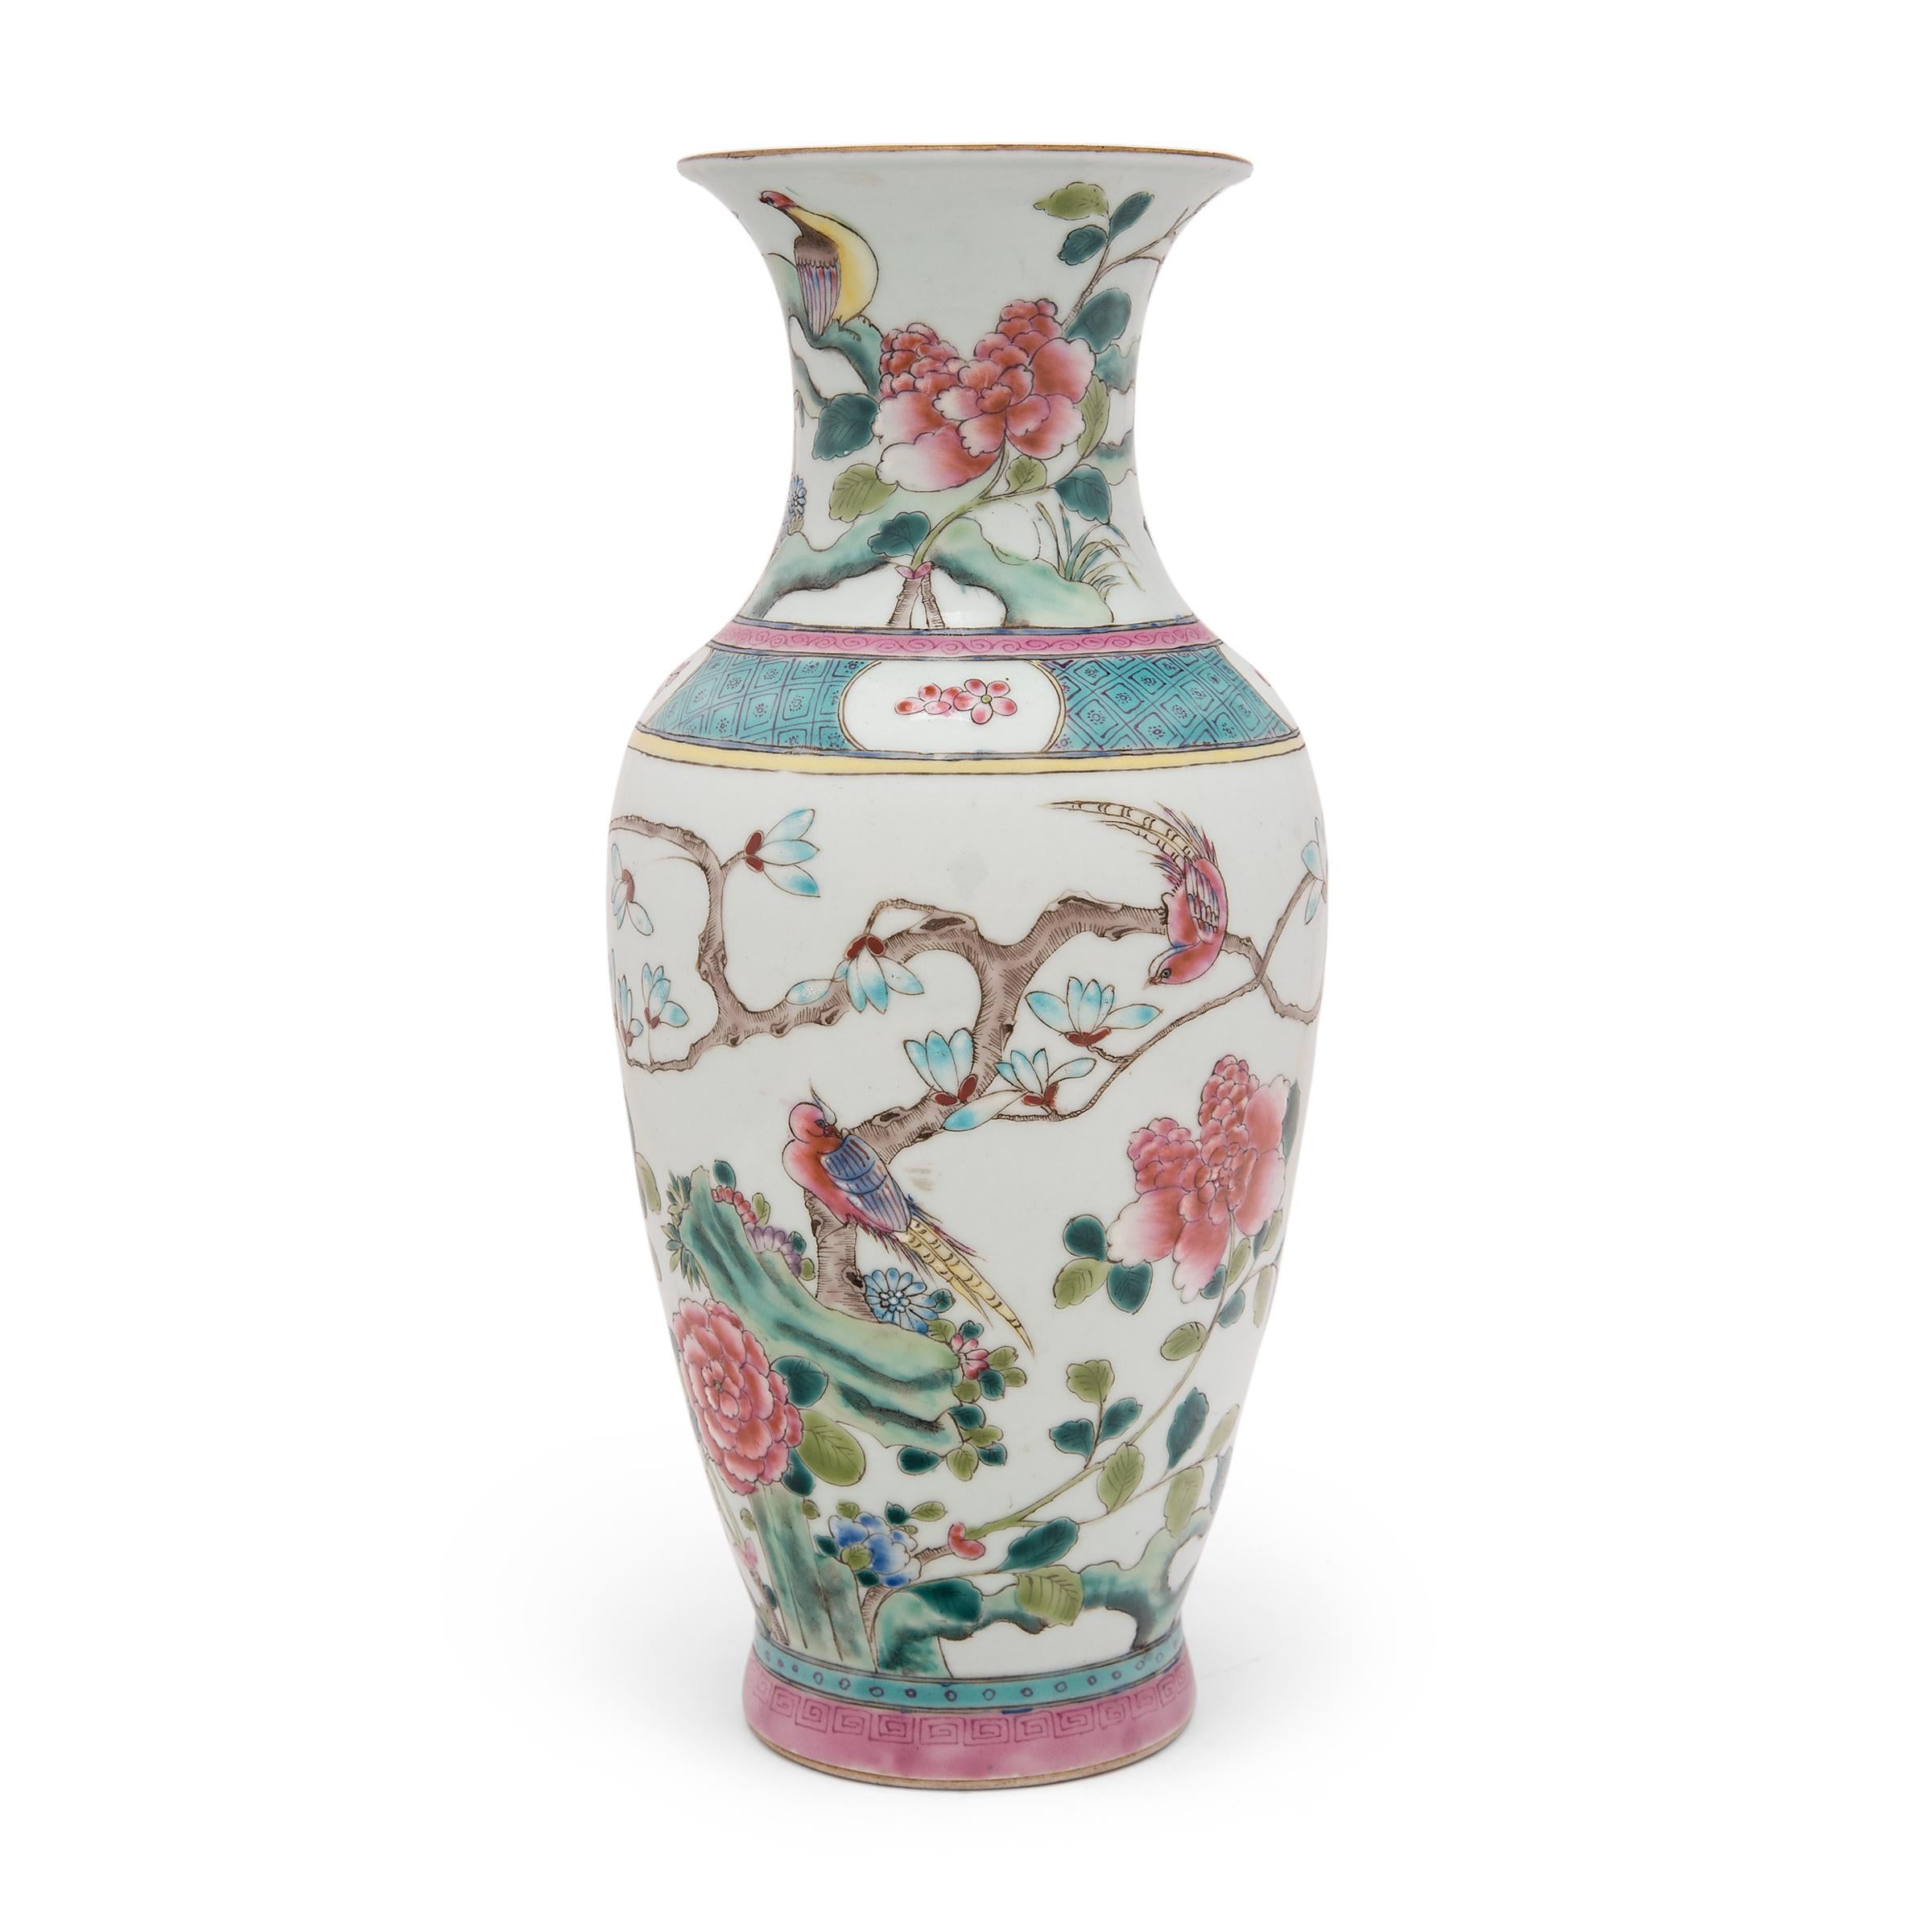 These delicate porcelain vases are made to a traditional form known as the phoenix-tail vase, defined by its tapered body, constricted neck, and elegantly flared lip. The contoured forms are finely decorated with overglaze enamels in the famille